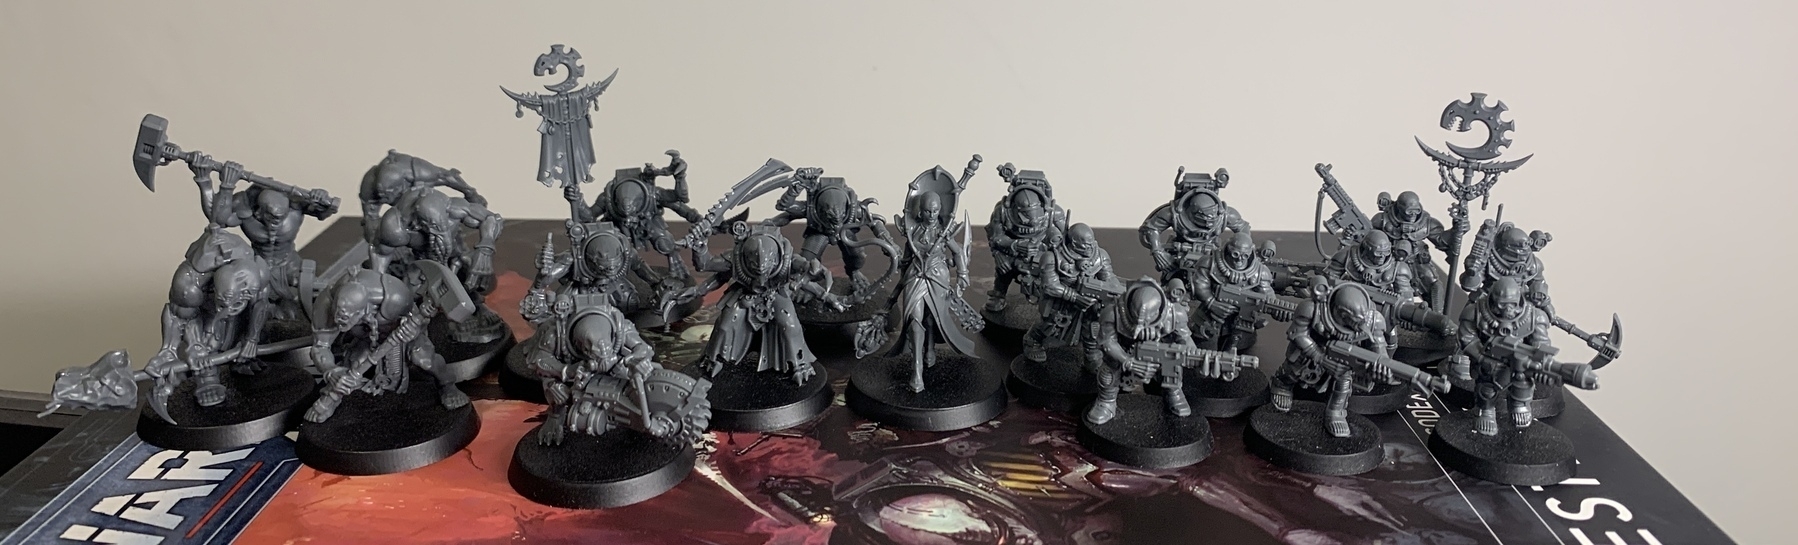 Several Genestealer Cults minitures  loosely arranged